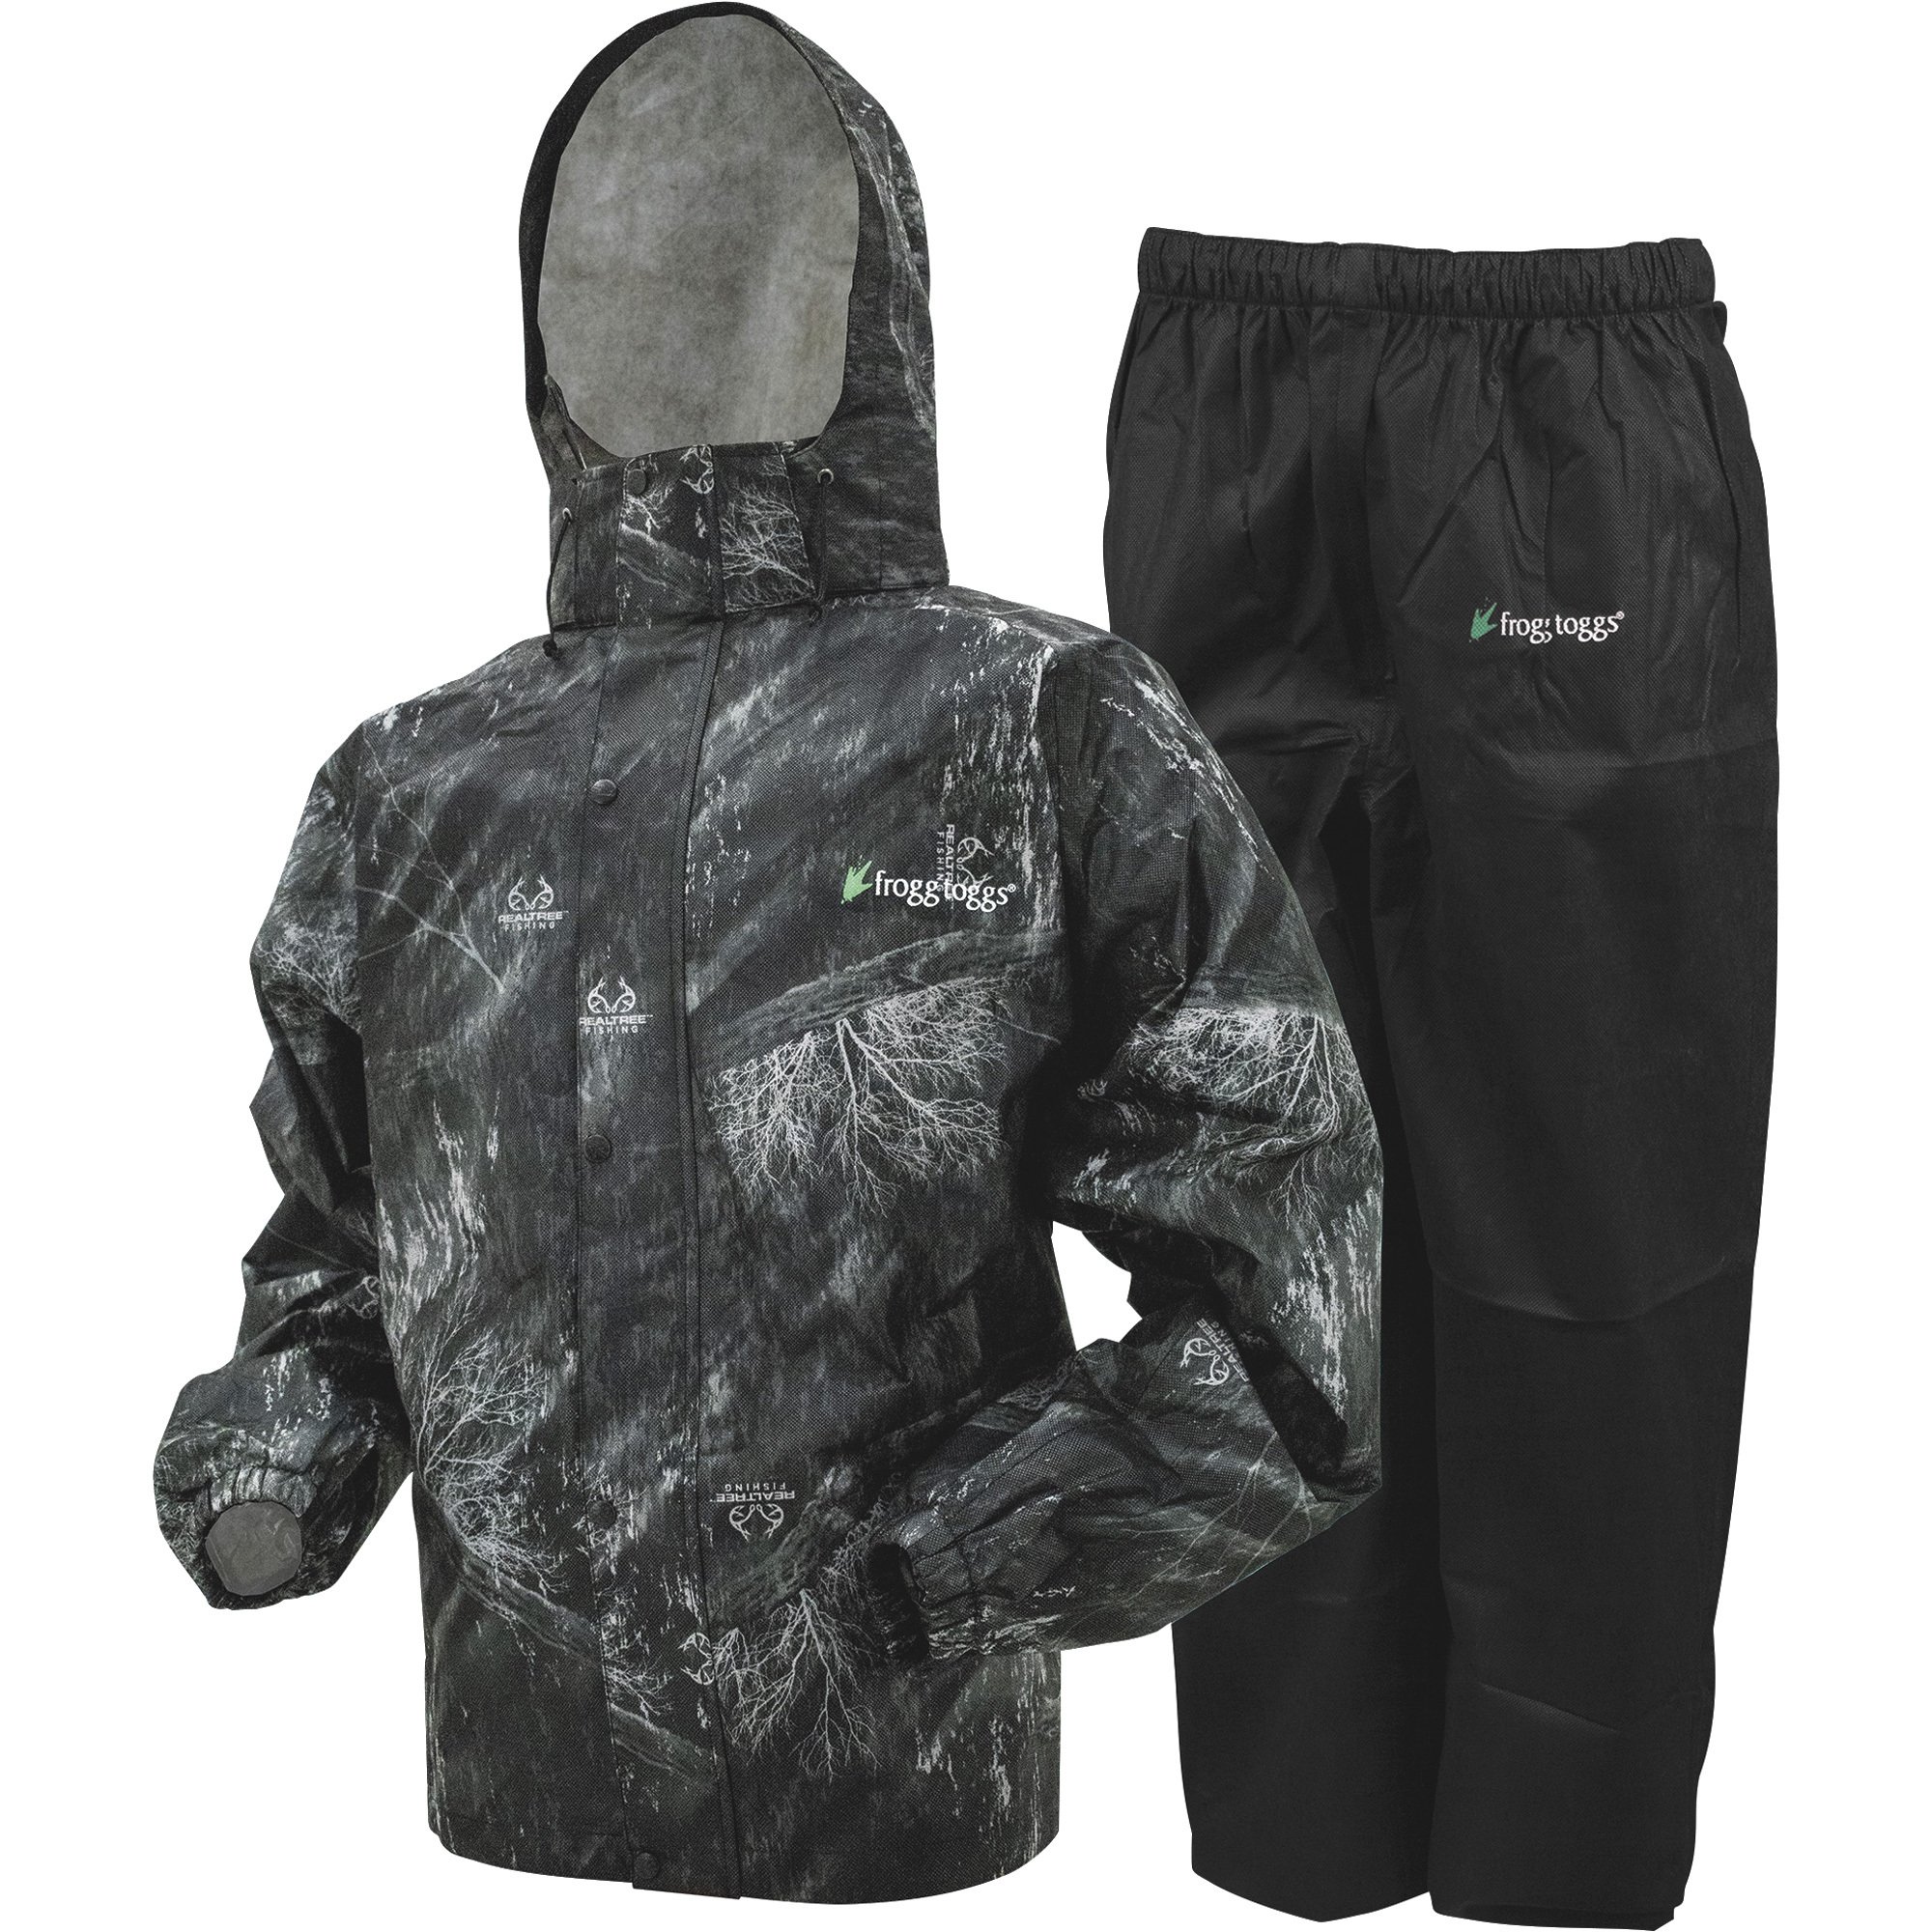 Frogg Toggs Men's All Sports Rain and Wind Jacket and Pants Suit ...